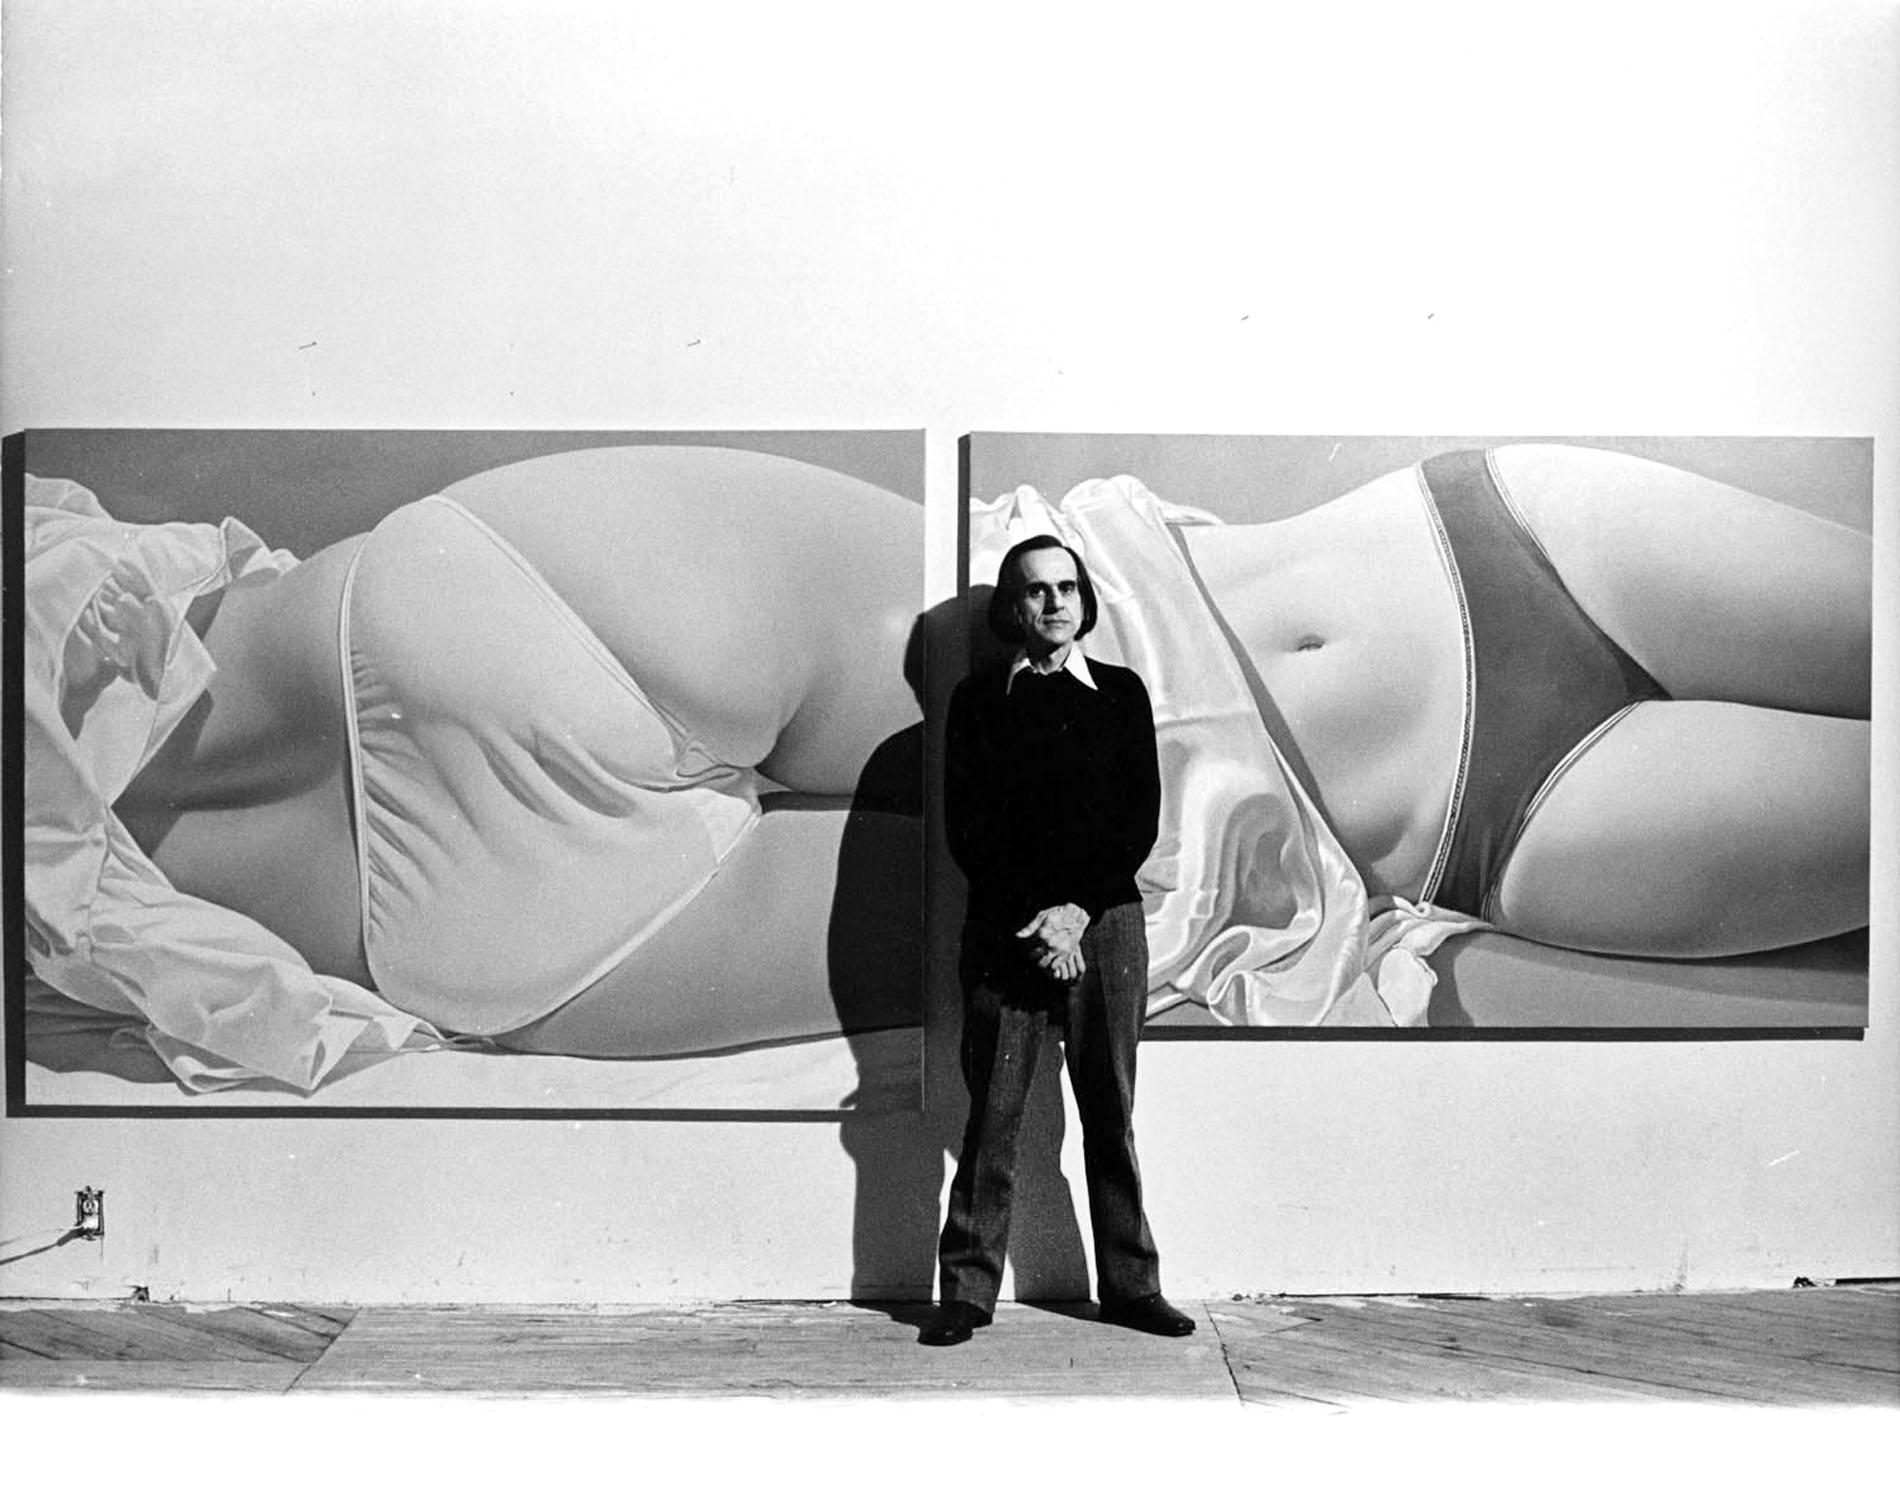 Jack Mitchell Black and White Photograph - Photorealist Artist John Kacere at an exhibition of his work